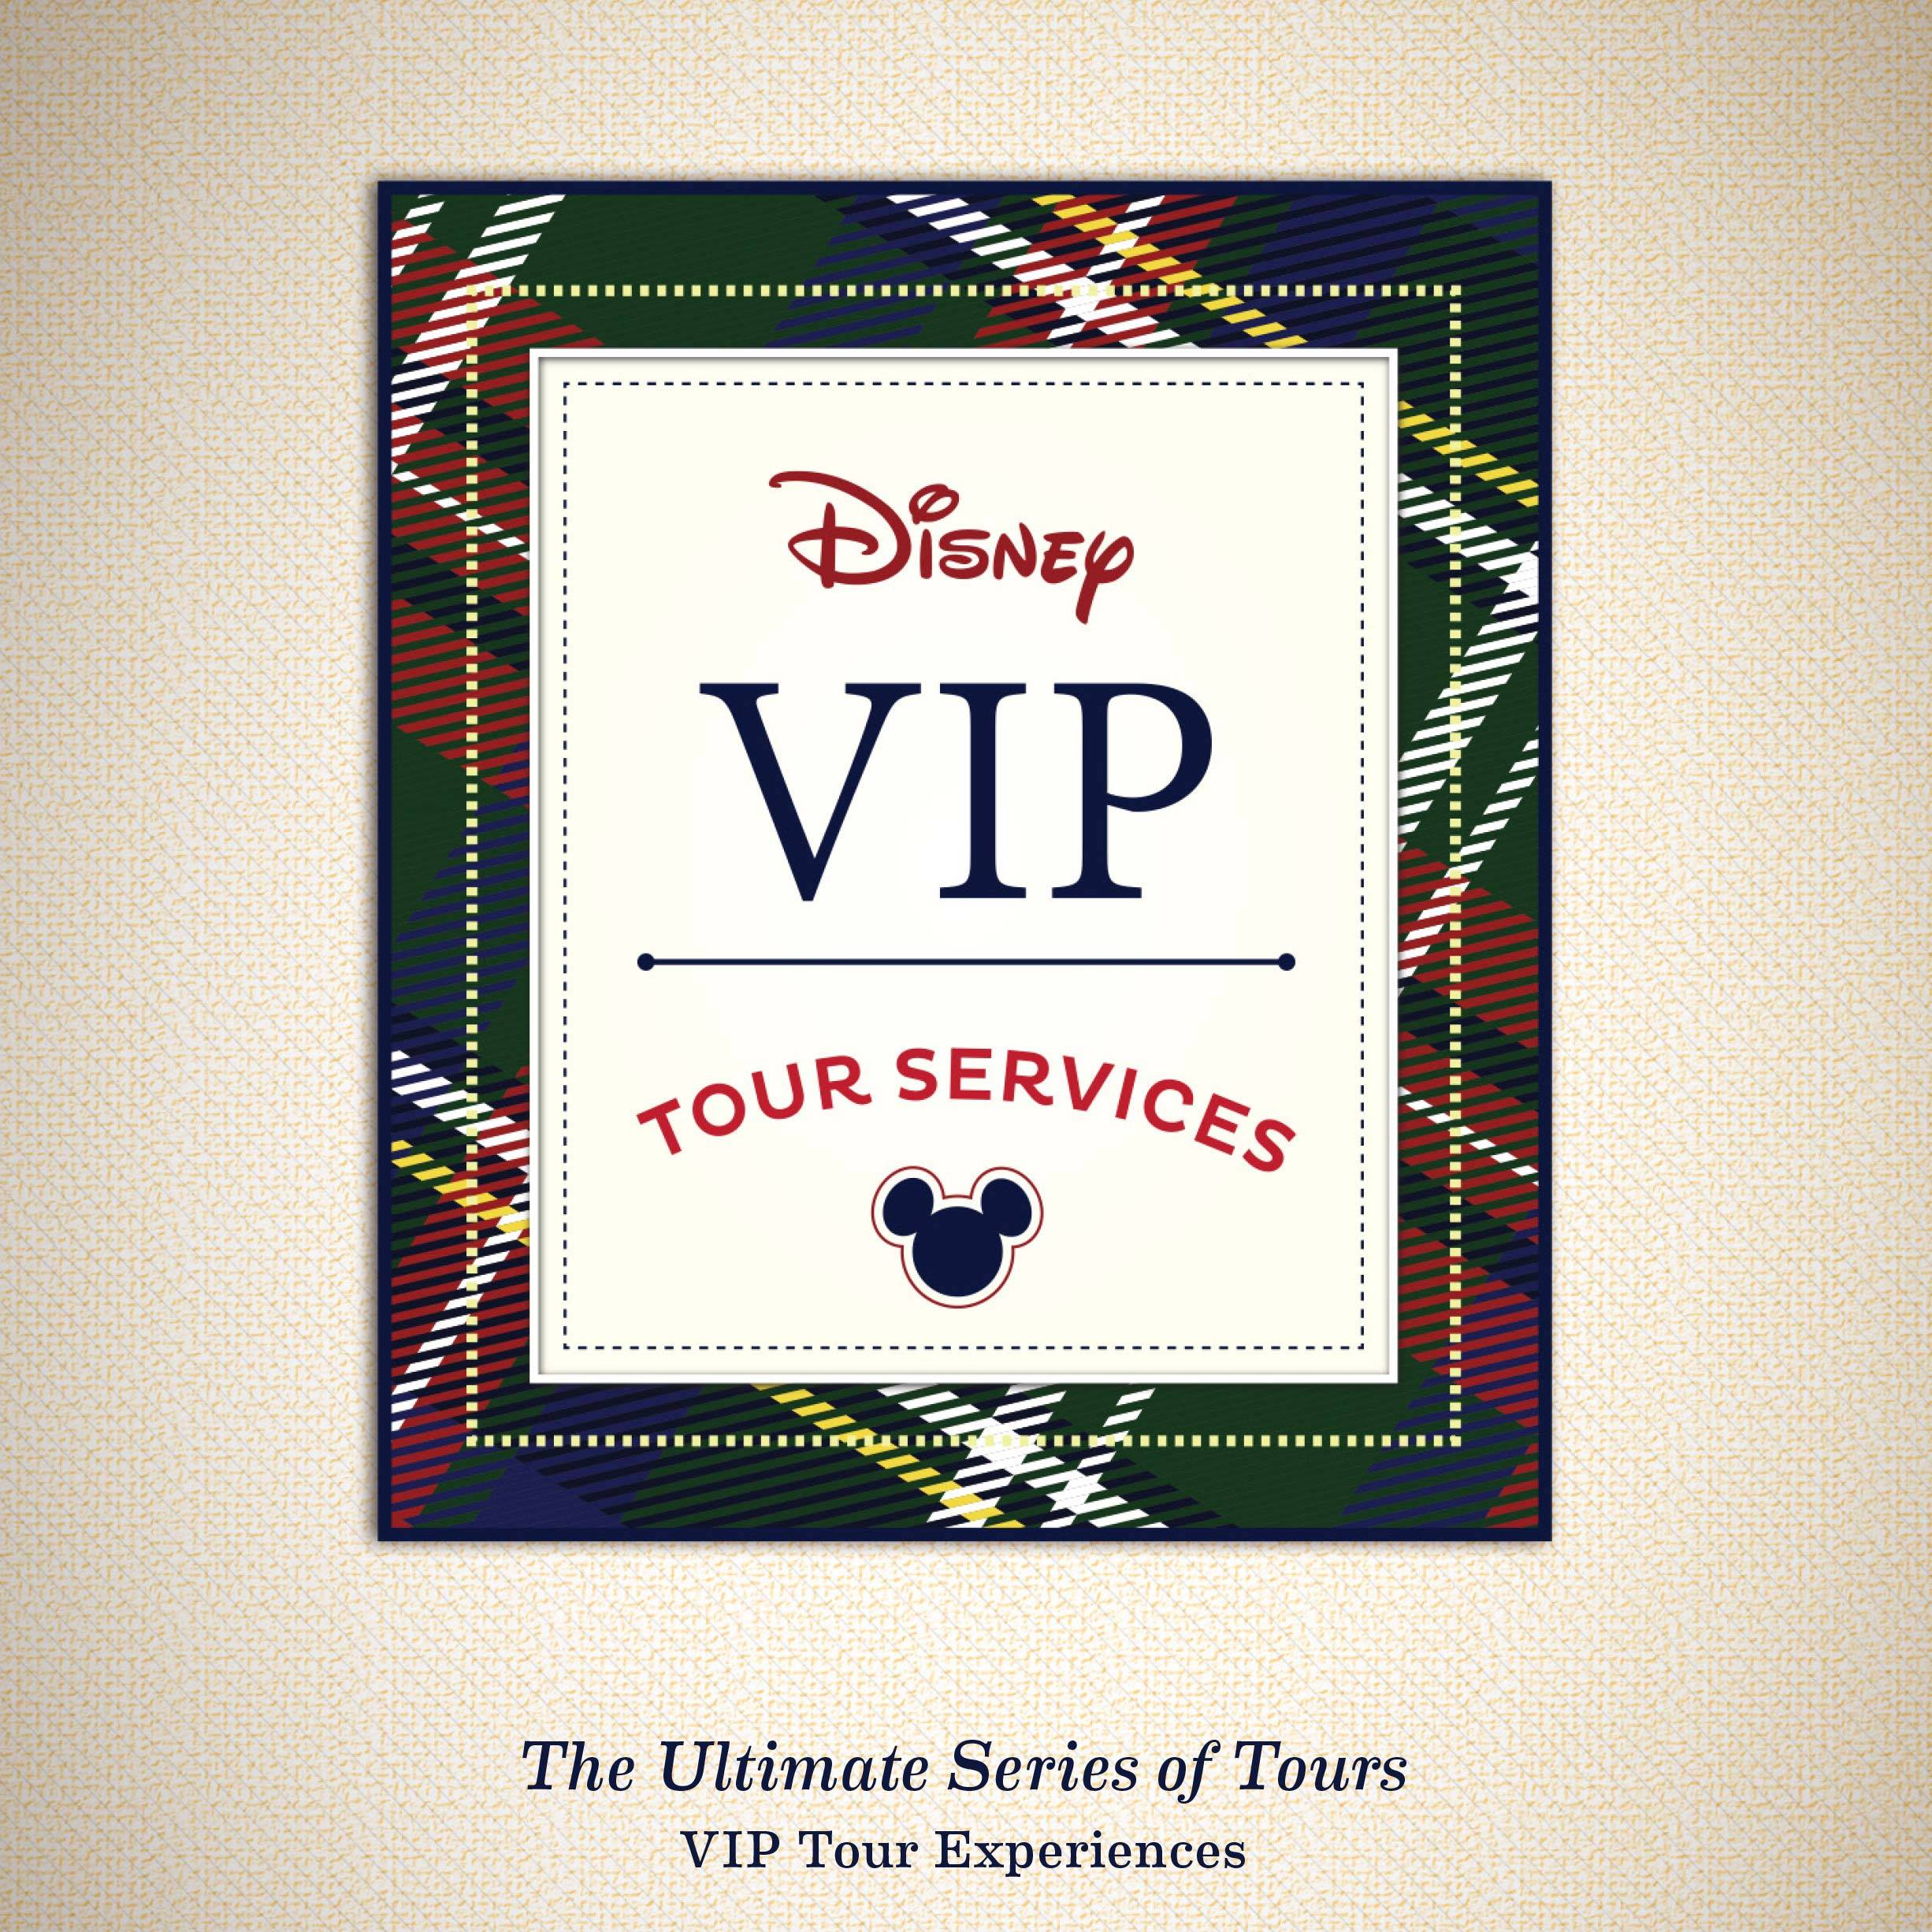 The Ultimate Day of Thrills - Walt Disney World VIP Tour Experience